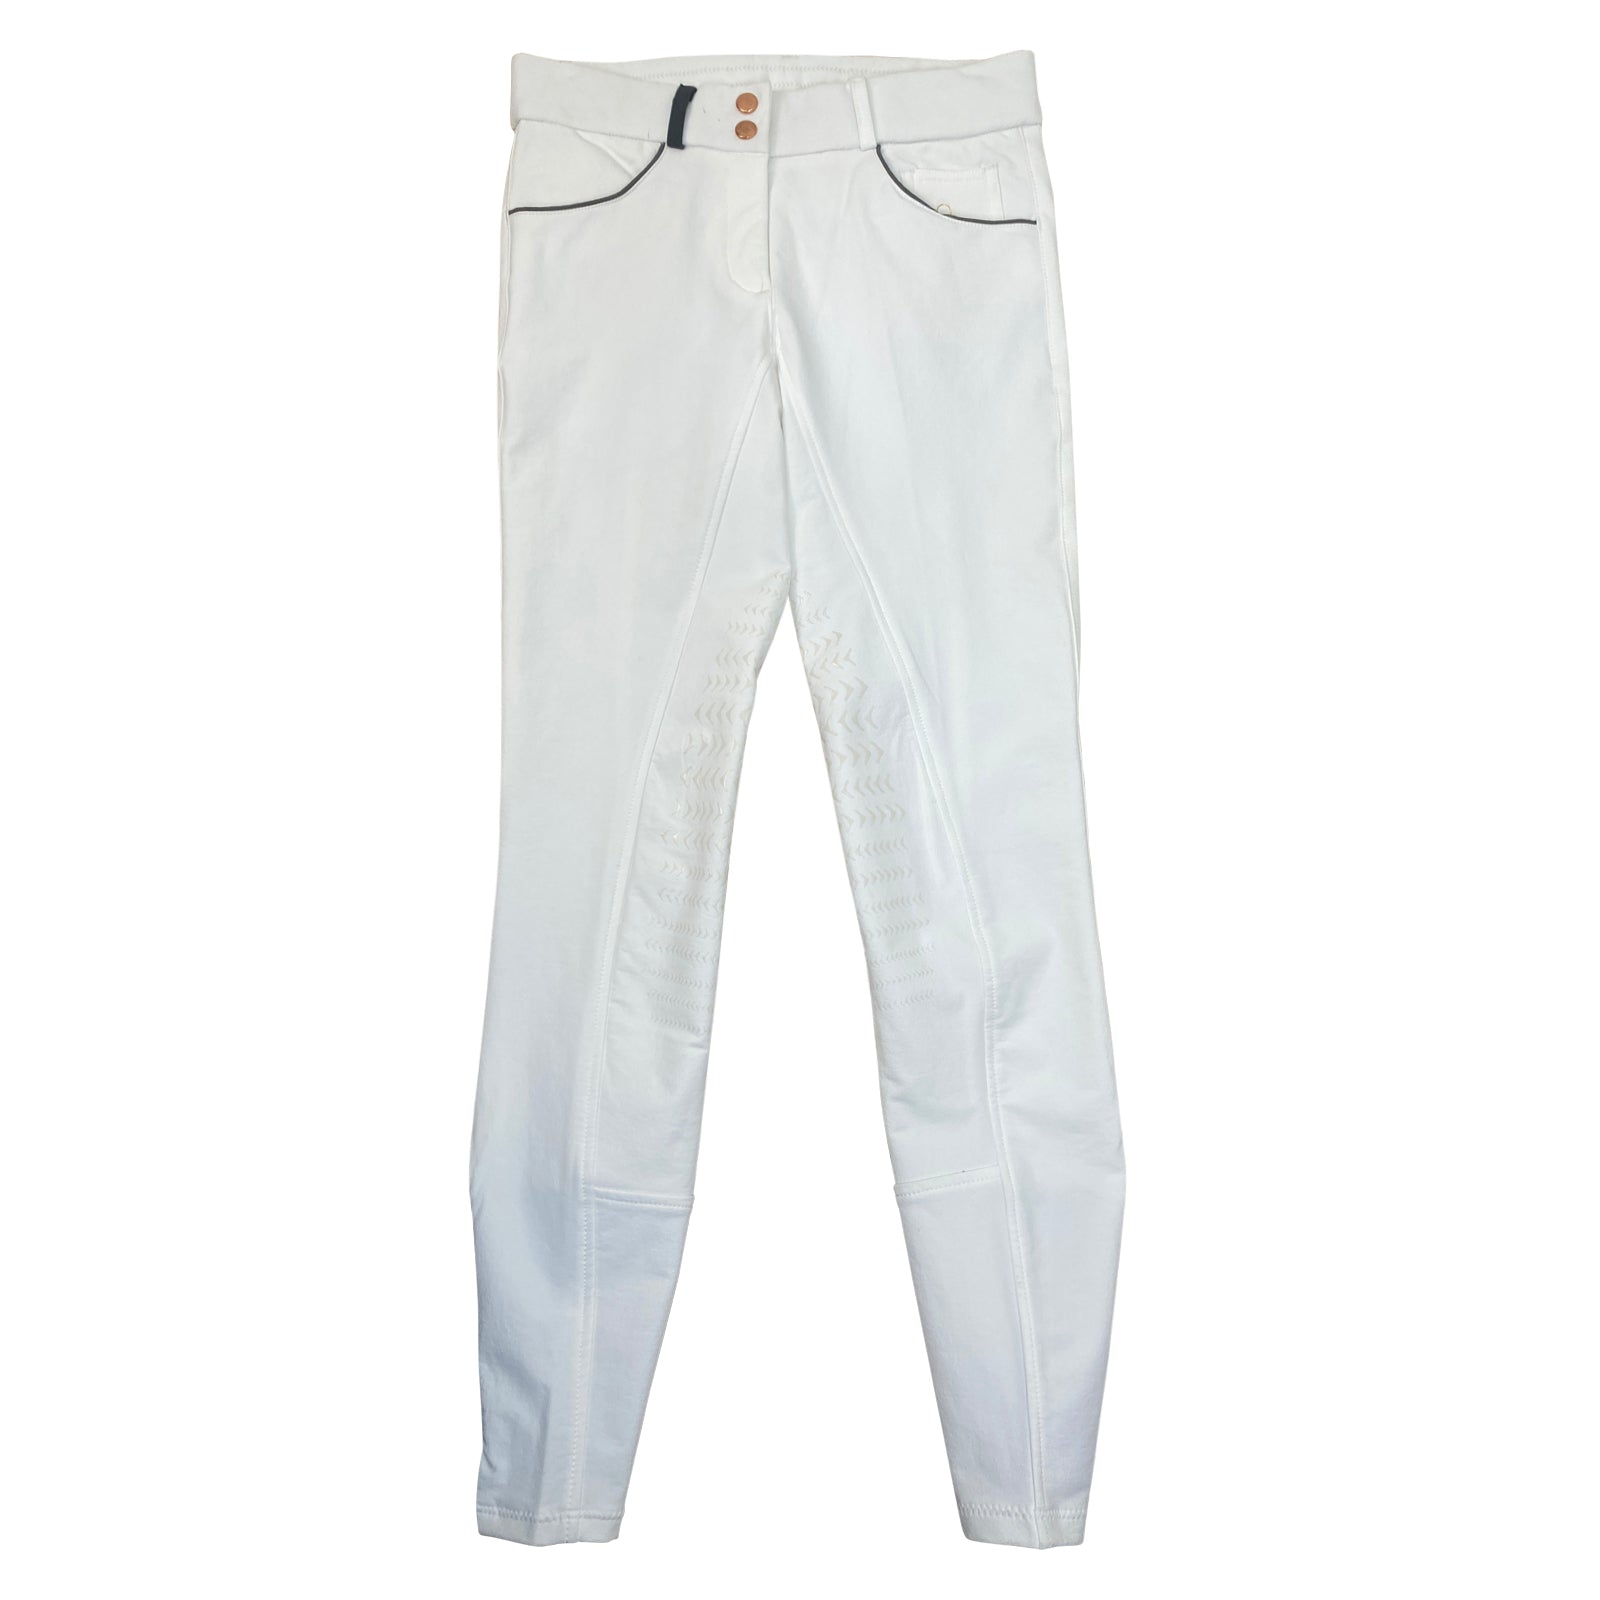 Equisite Lucille Breeches in White